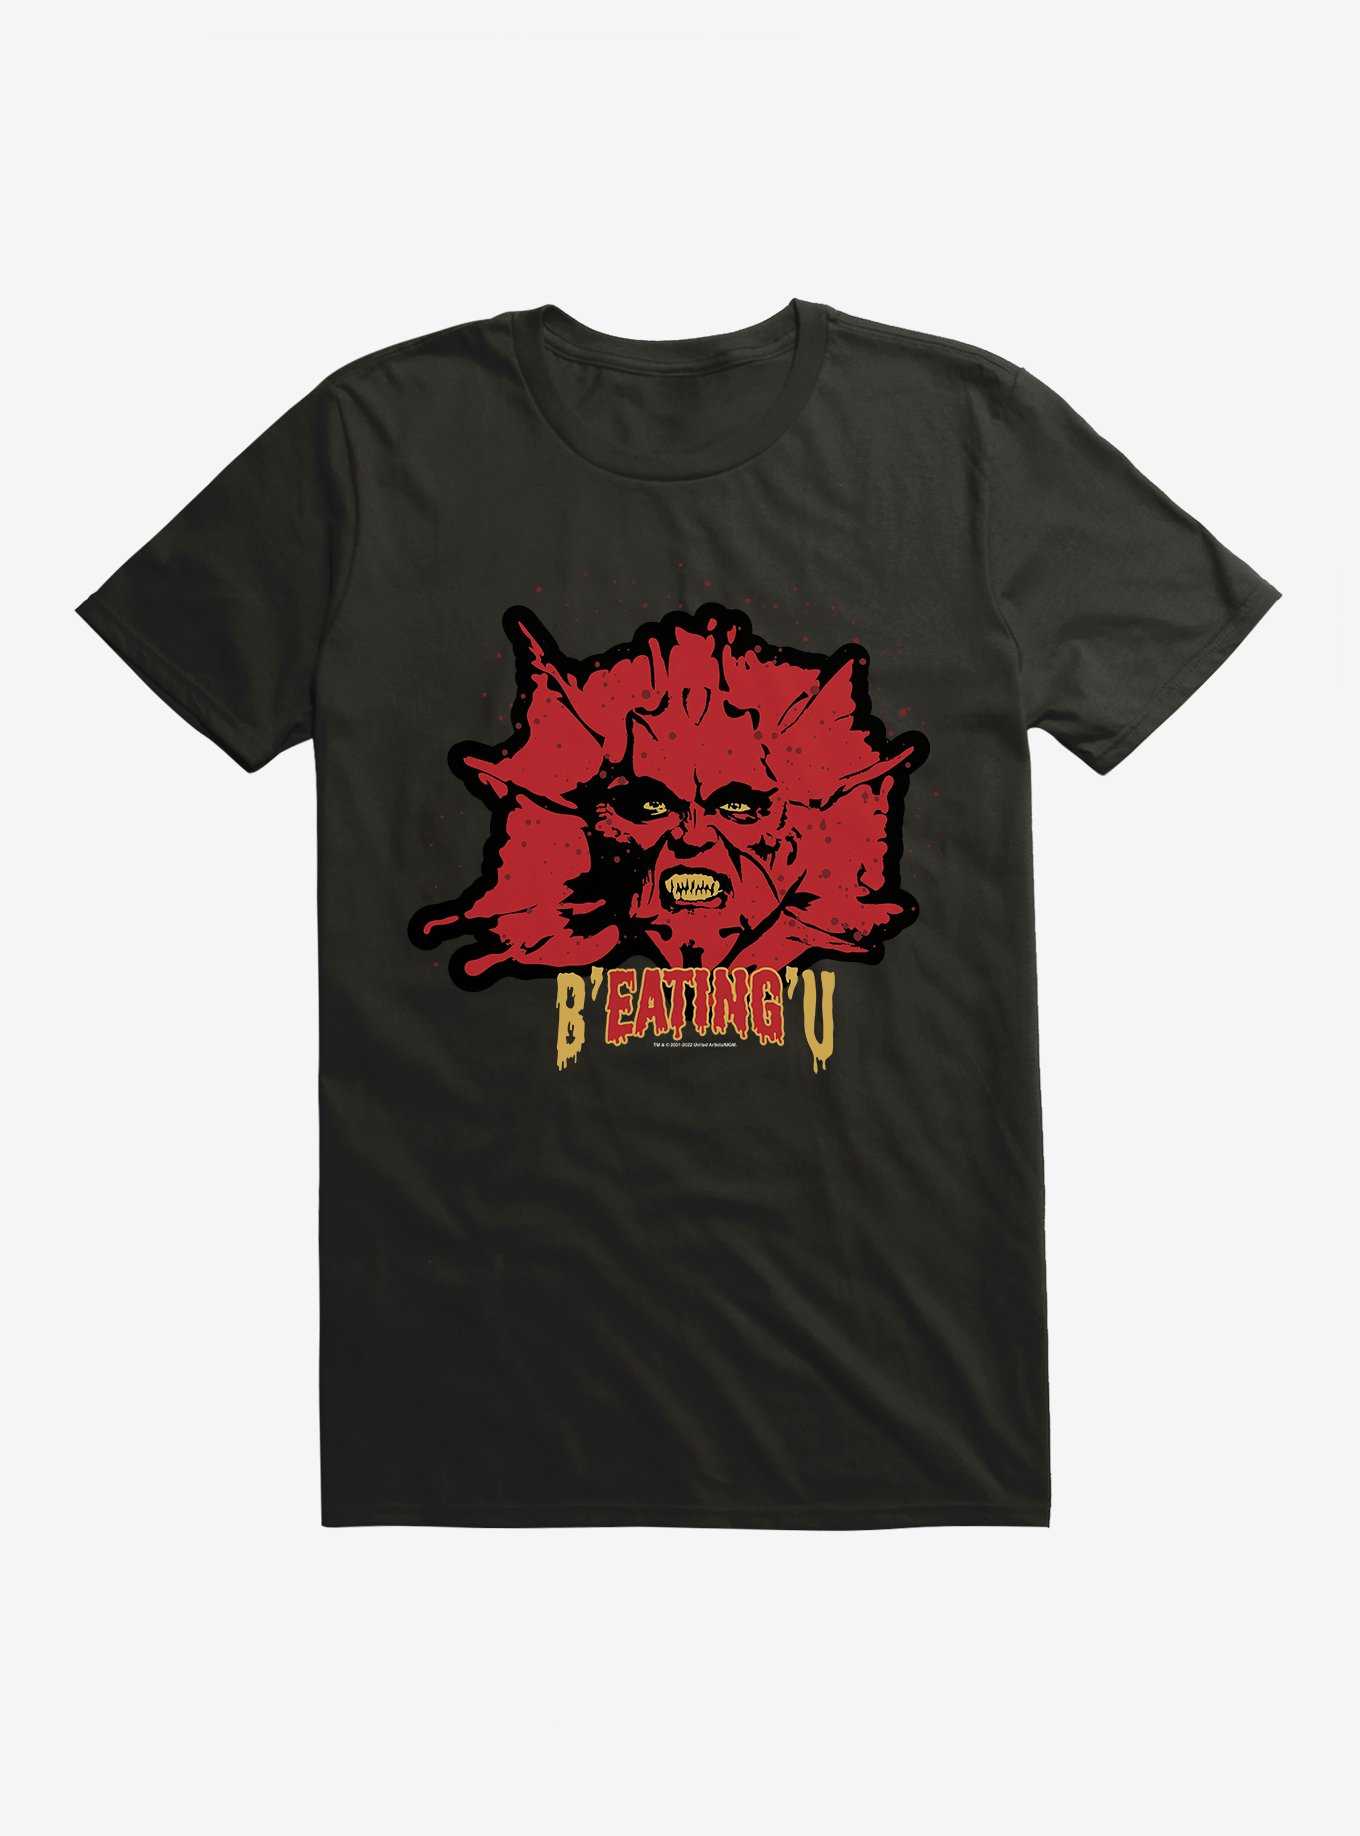 Jeepers Creepers B'Eating'U T-Shirt, , hi-res